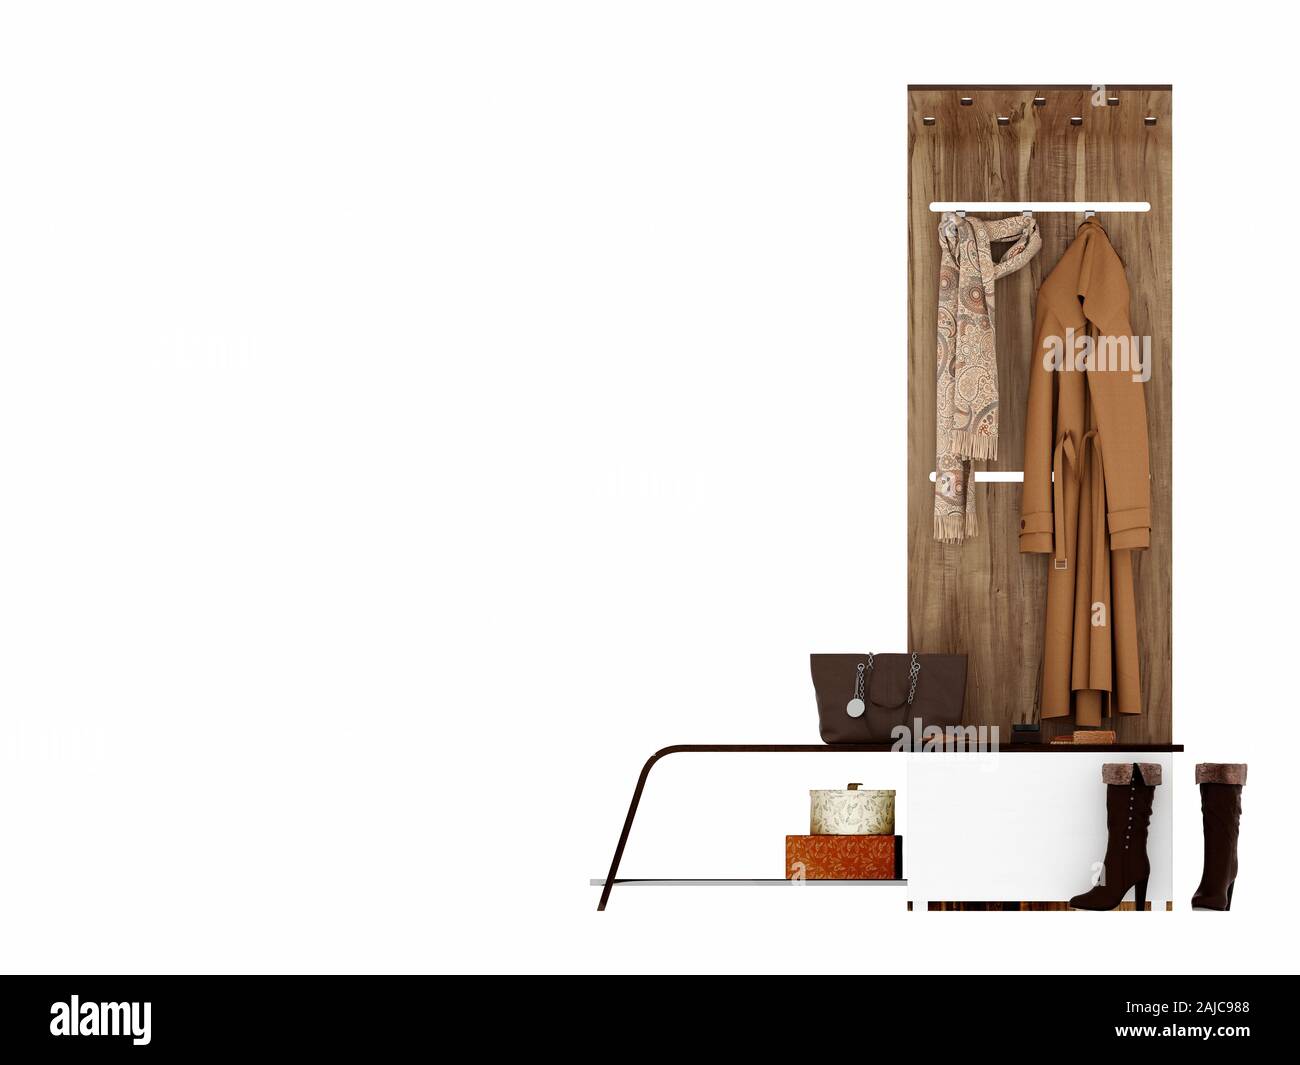 https://c8.alamy.com/comp/2AJC988/3d-render-of-coat-stand-and-clothes-2AJC988.jpg